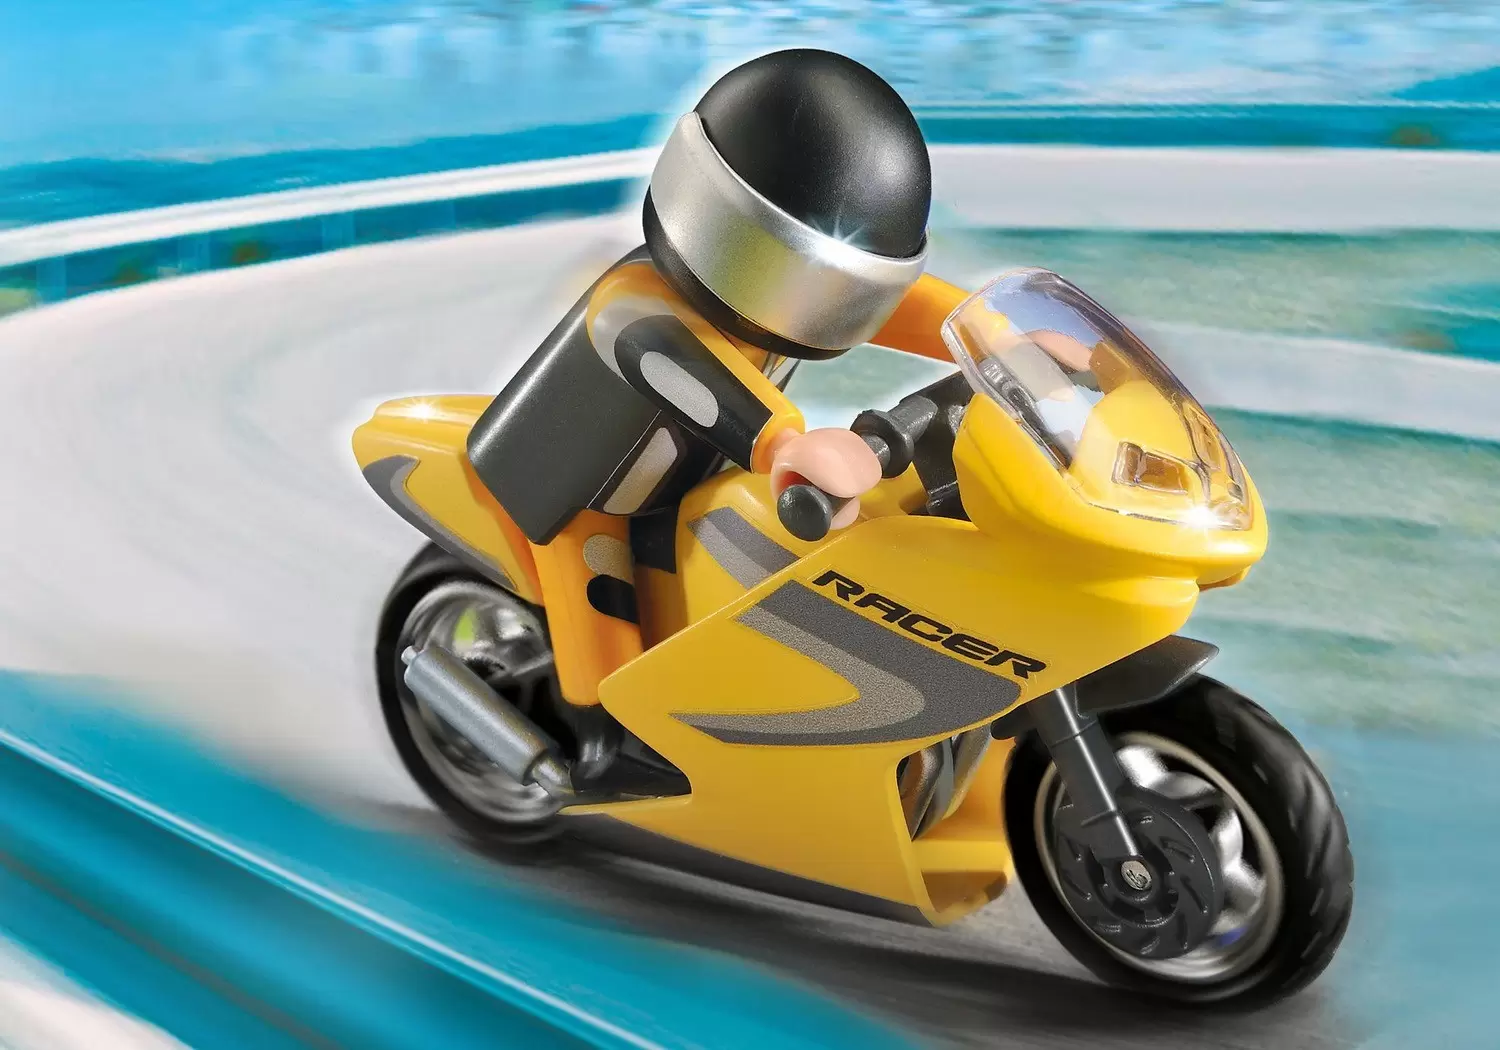 Playmobil Motor Sports - Super Racer Motorcycle with Rider